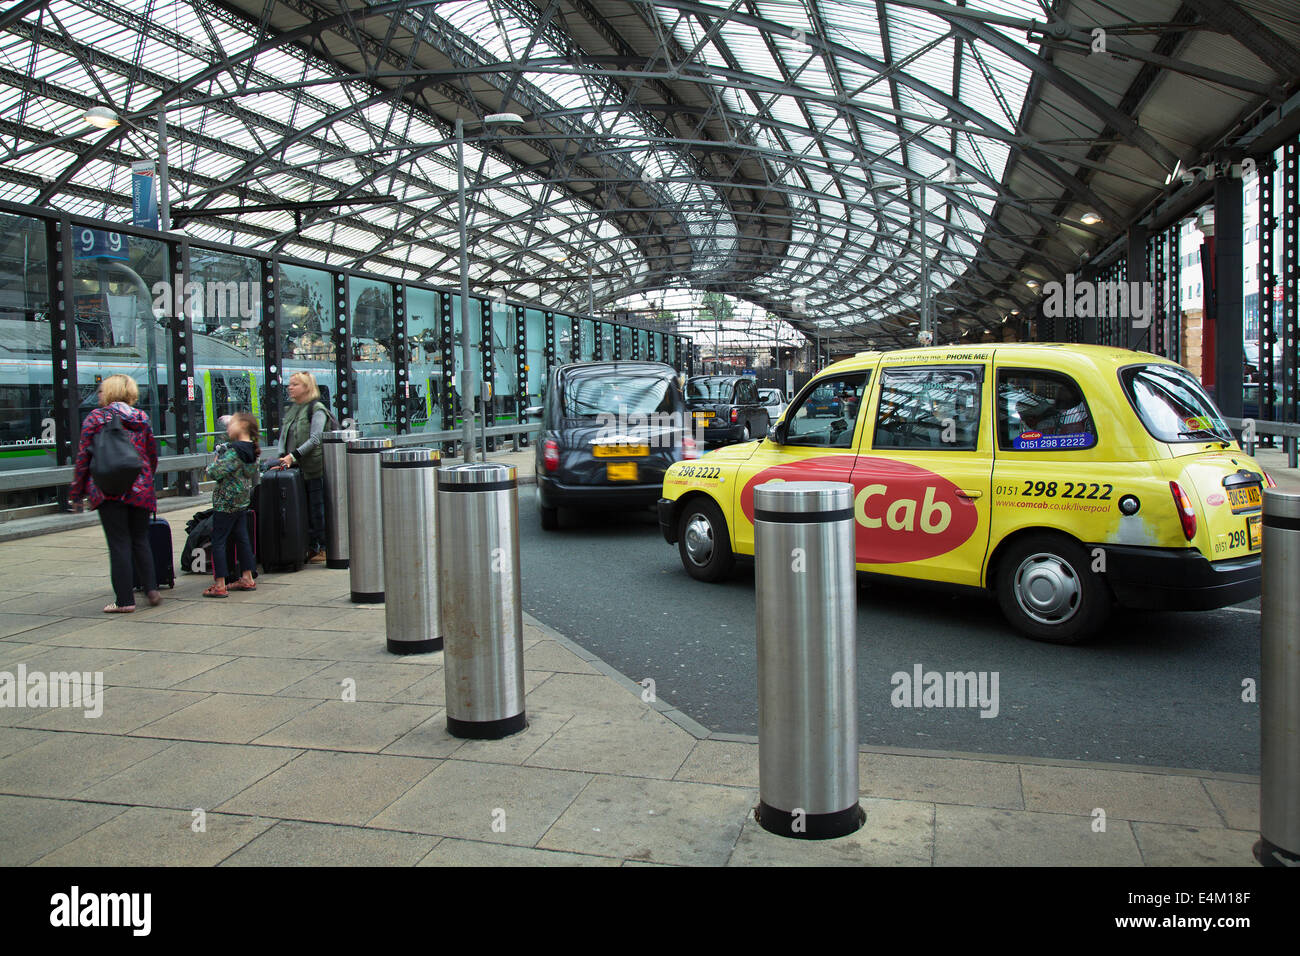 Taxis in Lime Street, Liverpool, Merseyside, UK. Taxi rank, TX4,  taxicab, hackney carriage, cab at busy Train Station with arrivals for Open Golf.  Increased passenger traffic has been reported as visitors to Liverpool and the Wirral arrrive to make connections for the Passengers and taxi cabs at Open Golf at Hoylake this week.  Hoylake station is on the Merseytravel 'Wirral Line' in the direction of West Kirby, which can be accessed from the concourse at Liverpool Lime Street railway station.   Merseyrail is the a preferred means for visitors to arrive at the Championship. Stock Photo